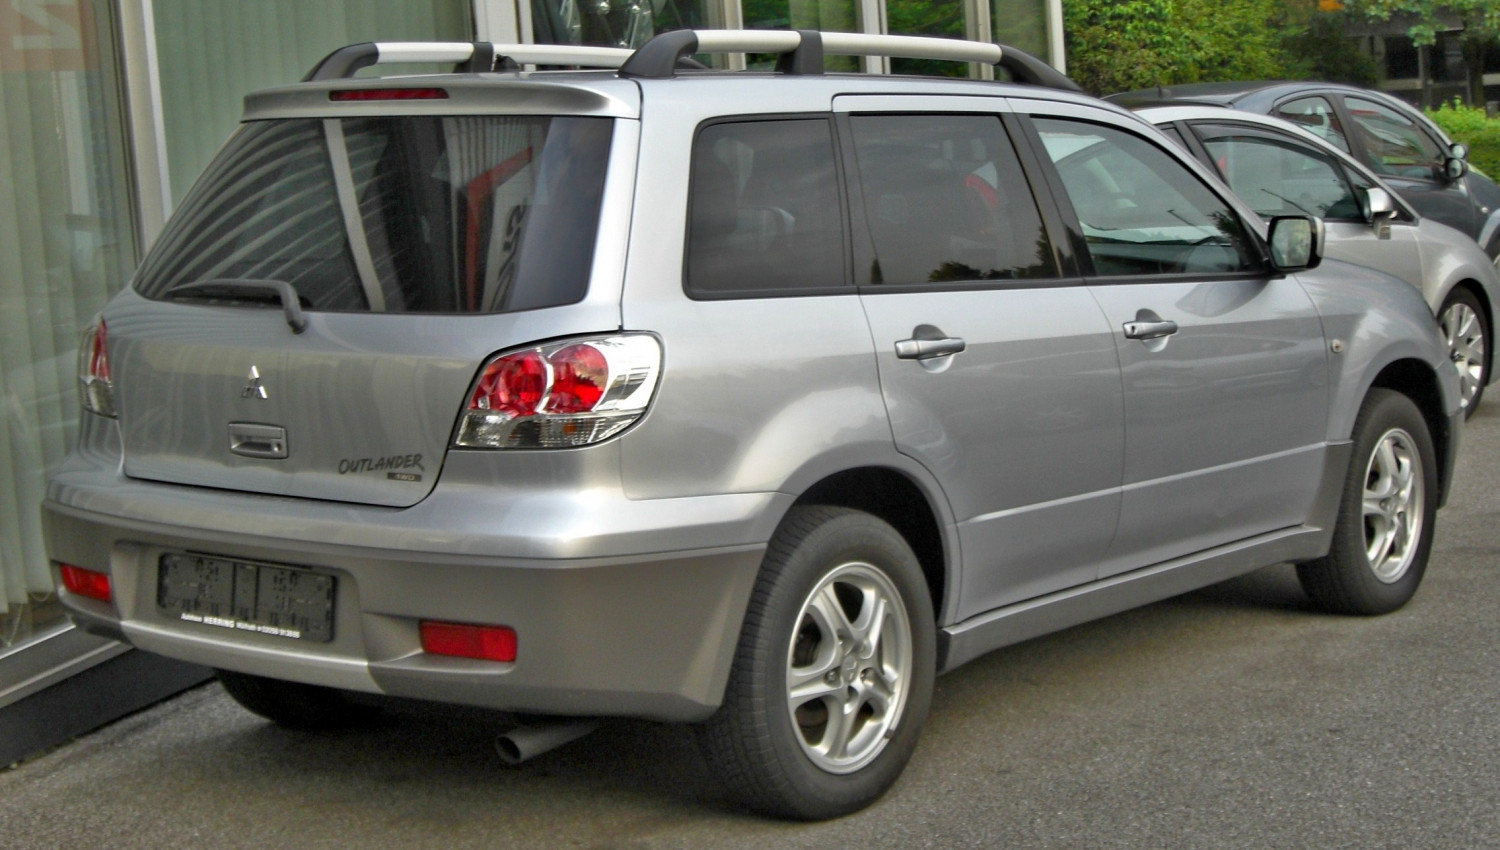 Example of a Outlander 1